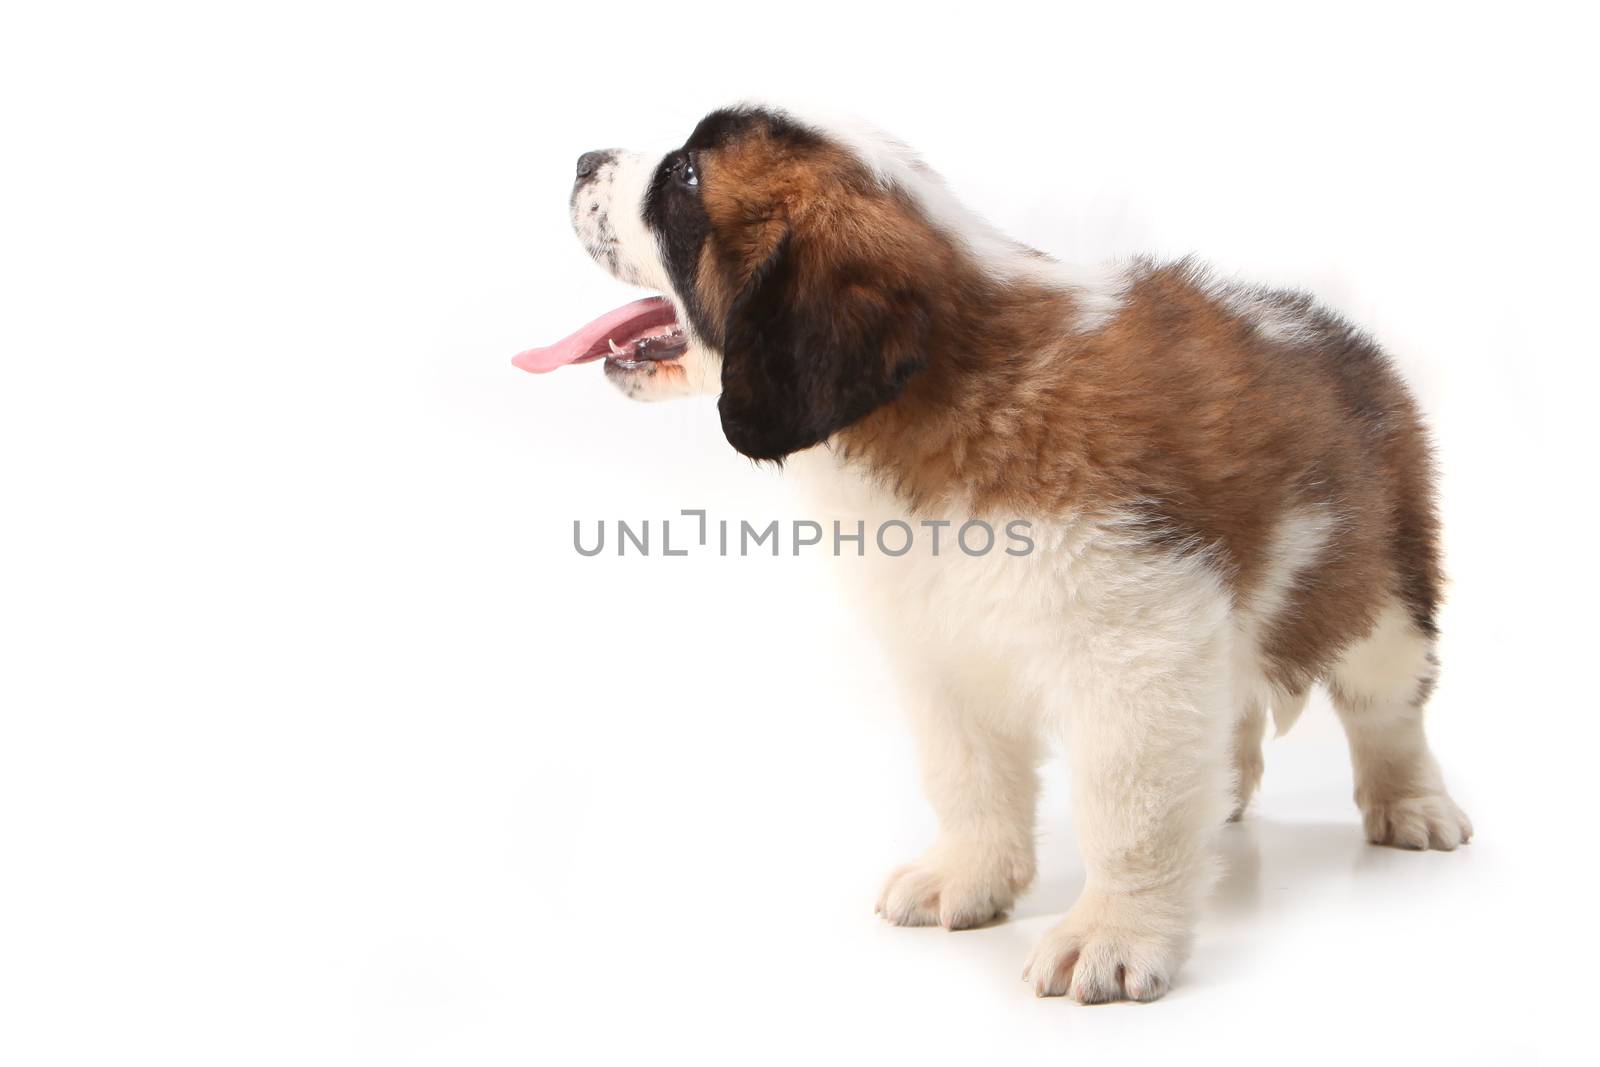 Panting Happy Saint Bernard Looking up and Sideways on White Background